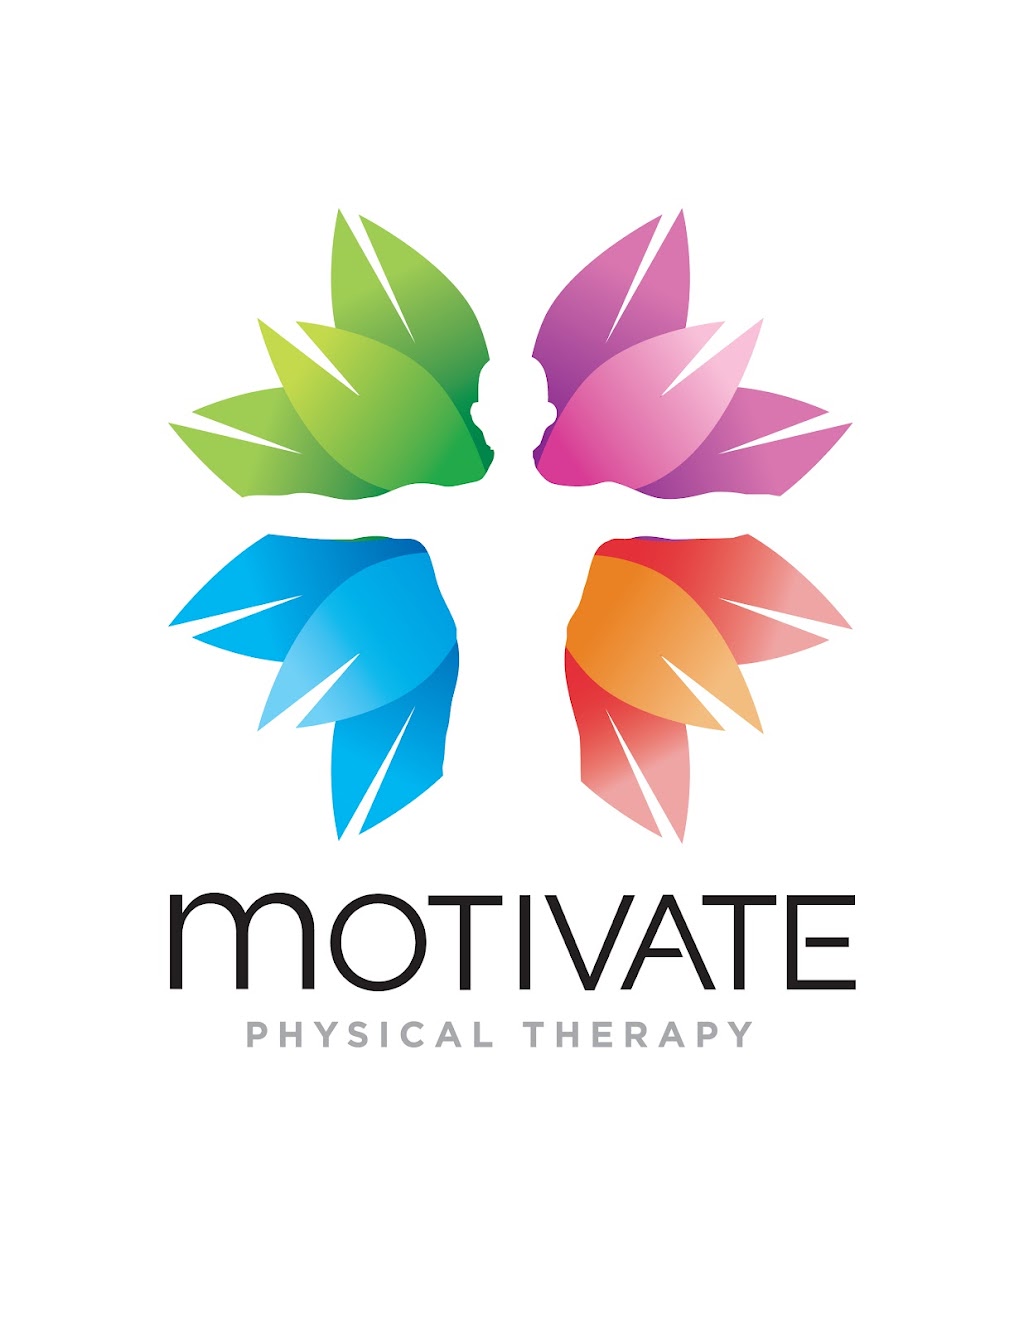 MOTIVATE Physical Therapy | 1 Idlewild Ave Suite 2, Cornwall-On-Hudson, NY 12520 | Phone: (845) 501-4171